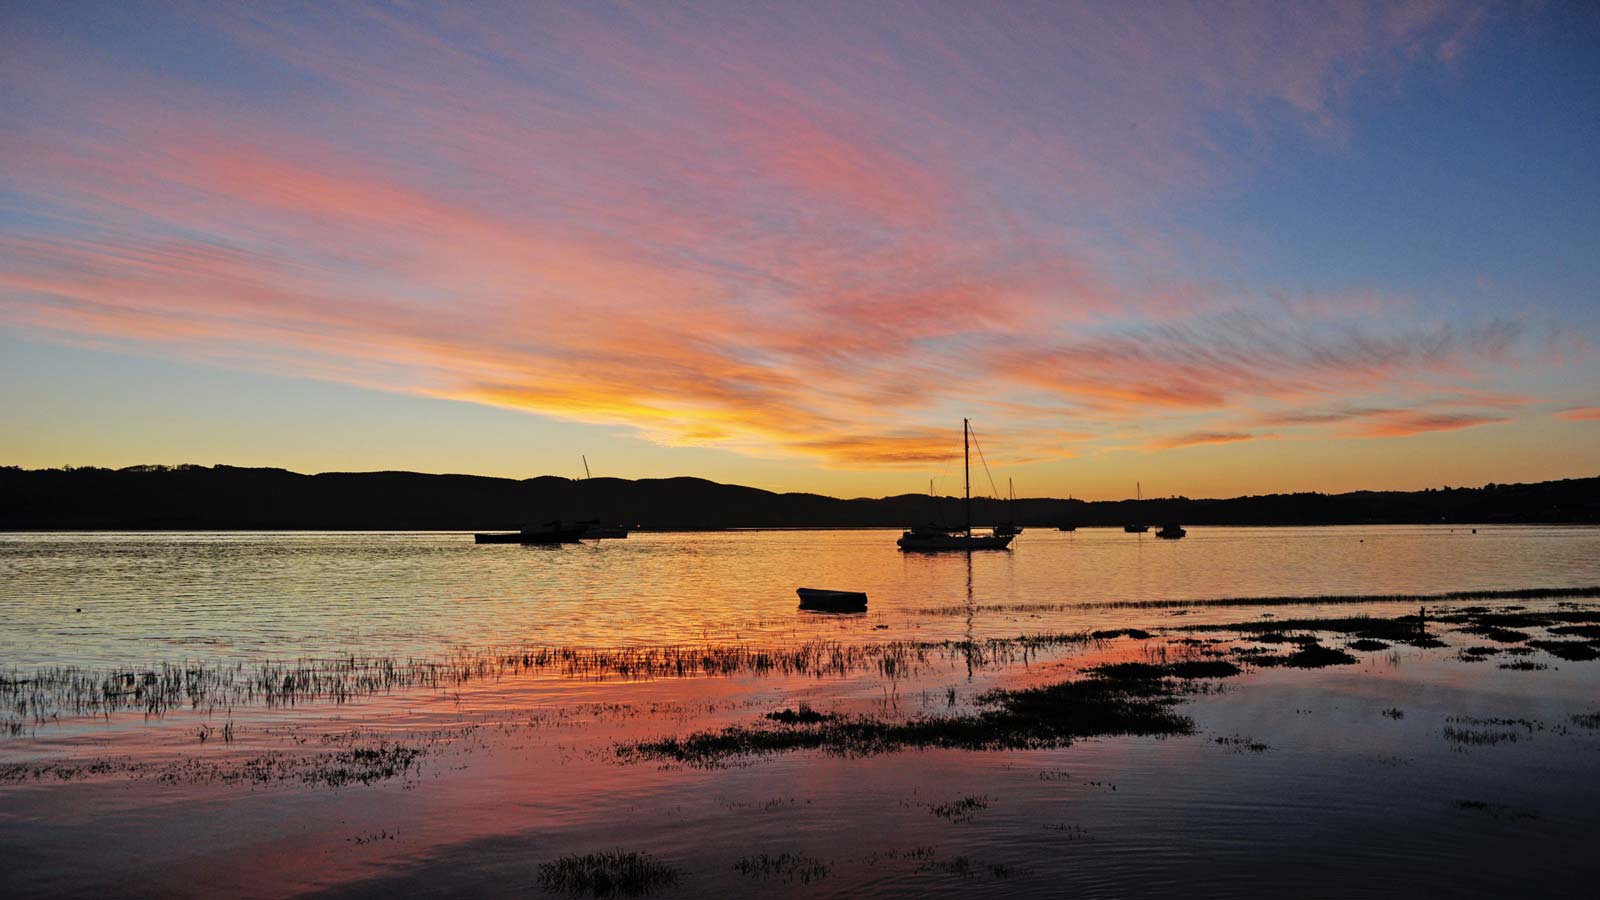 <p>Known as “<a href="https://knysnabasinproject.co.za/knysna-estuary-jewel-of-the-garden-route/" rel="nofollow noopener">the jewel of the Garden Route</a>,” this town is situated on the banks of the Knysna estuary and is loved for its incredible seafood, bathing beaches, forest hikes, and the two islands that comprise the town. </p>